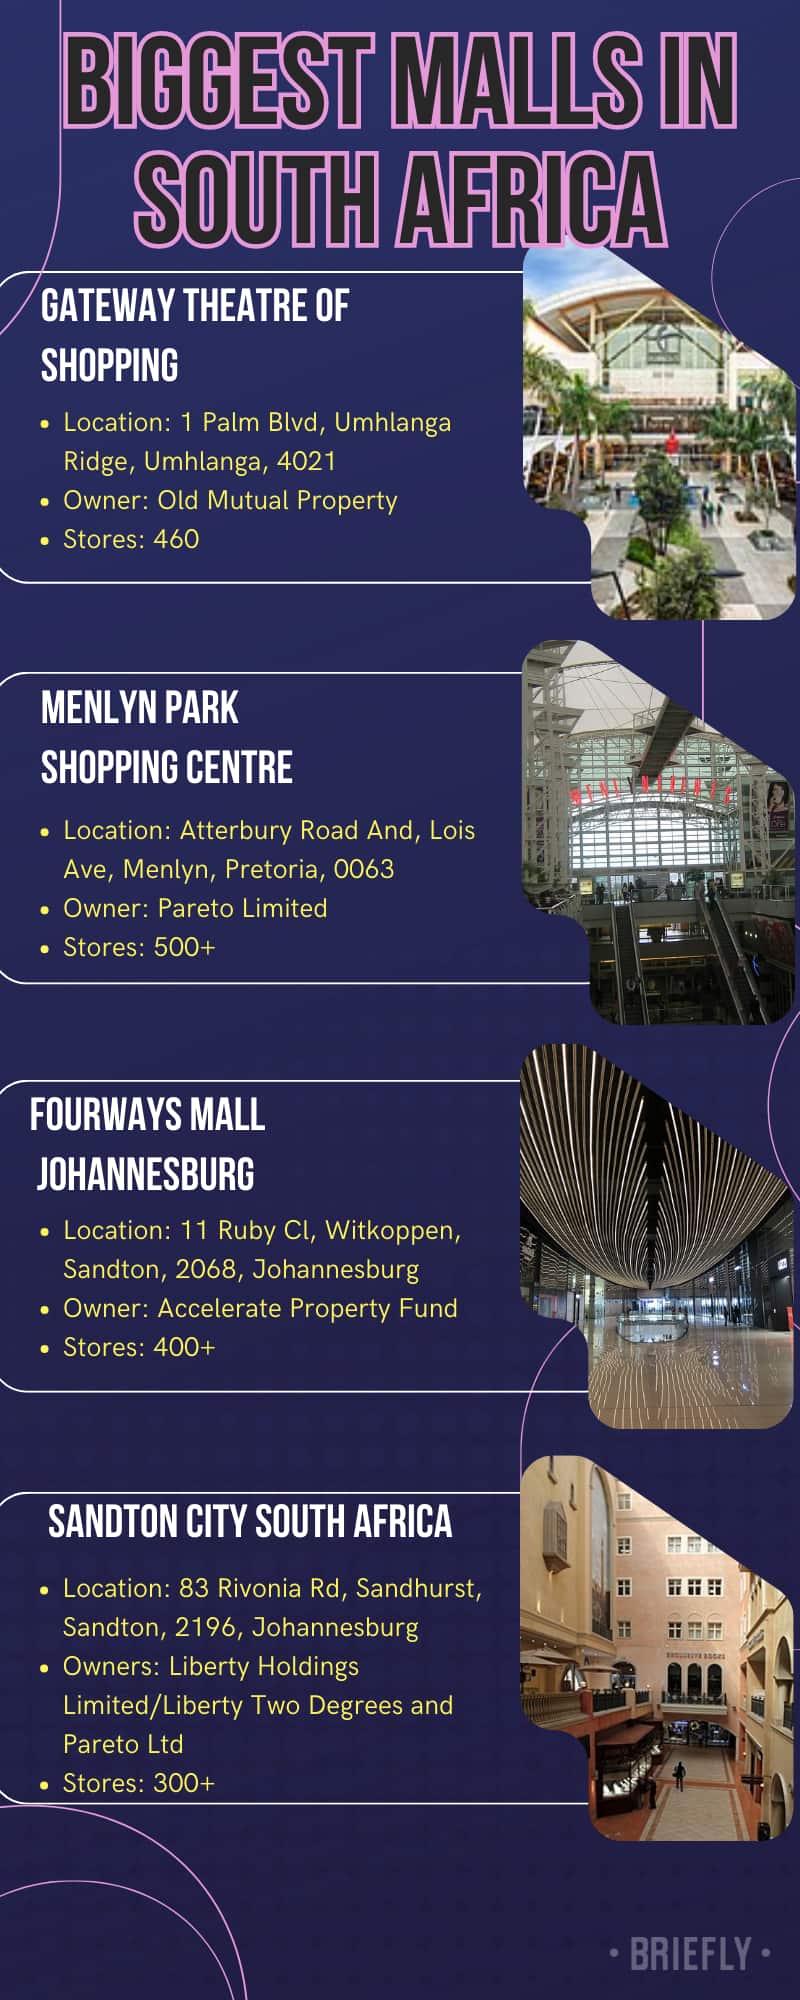 Biggest malls in South Africa